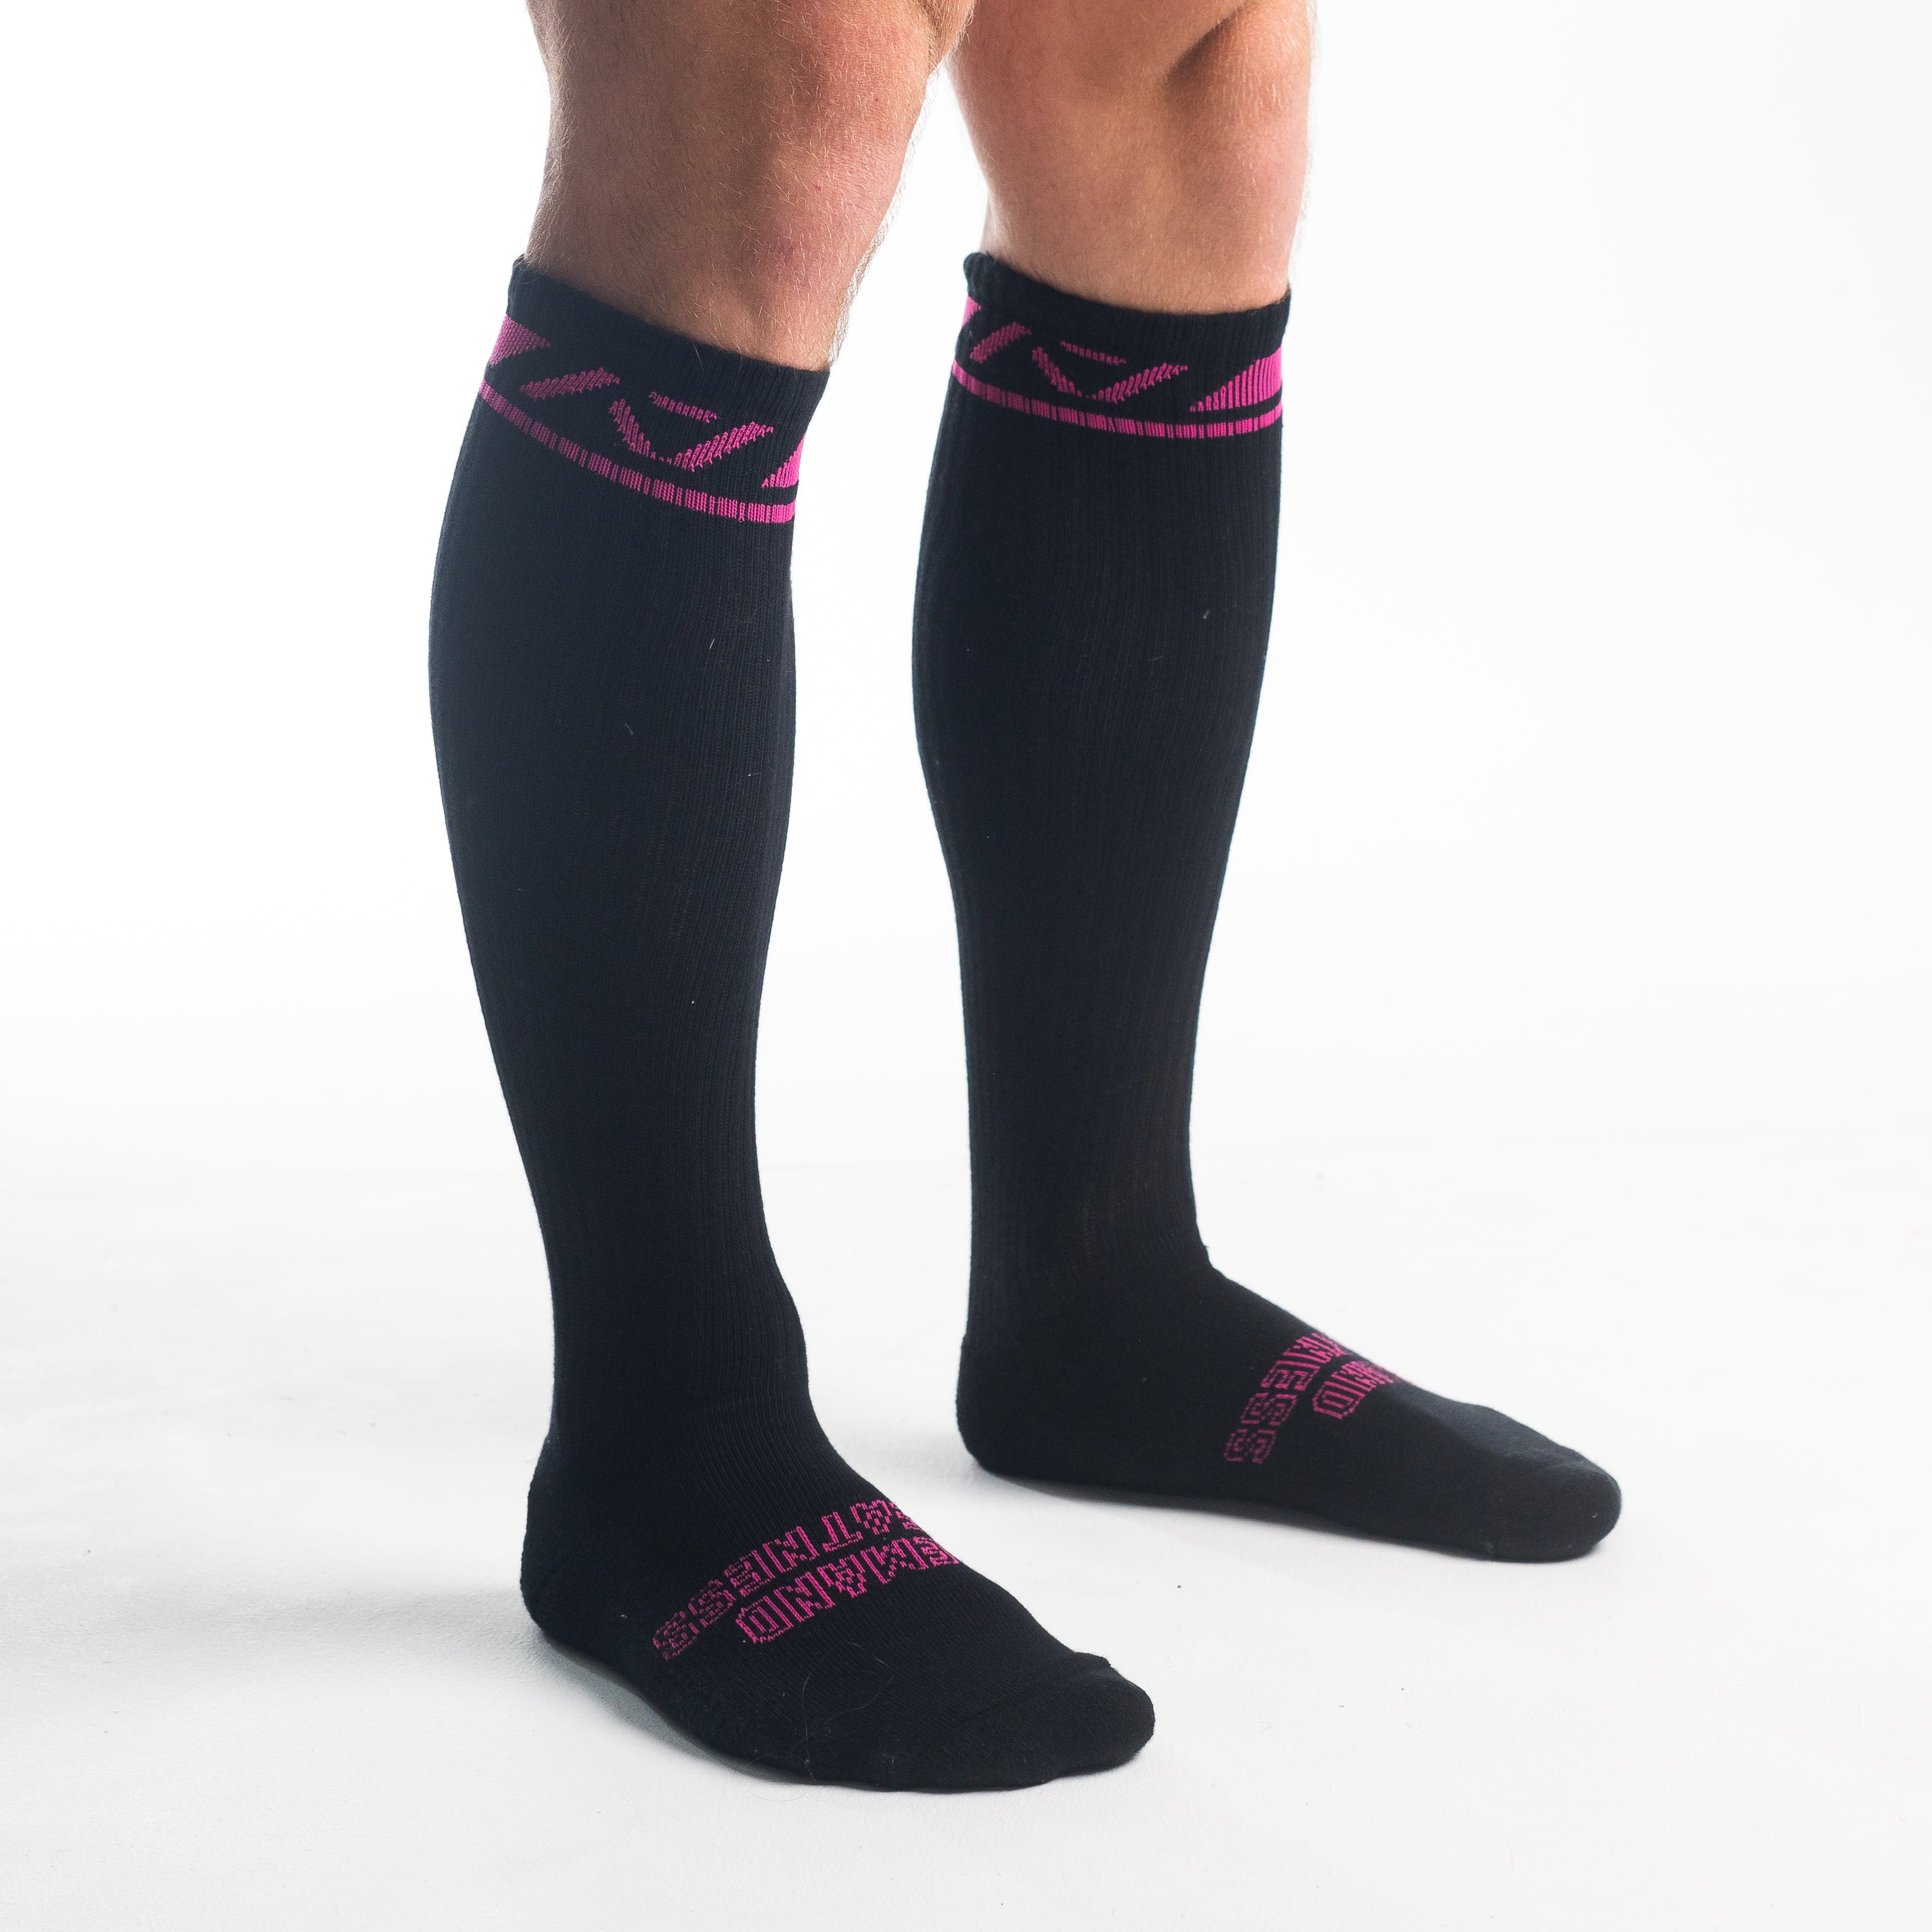 A7 Flamingo Deadlift socks are designed specifically for pulls and keep your shins protected from scrapes. A7 deadlift socks are a perfect pair to wear in training or powerlifting competition. The IPF Approved Kit includes Powerlifting Singlet, A7 Meet Shirt, A7 Zebra Wrist Wraps, A7 Deadlift Socks, Hourglass Knee Sleeves (Stiff Knee Sleeves and Rigor Mortis Knee Sleeves). Genouillères powerlifting shipping to France, Spain, Ireland, Germany, Italy, Sweden and EU.